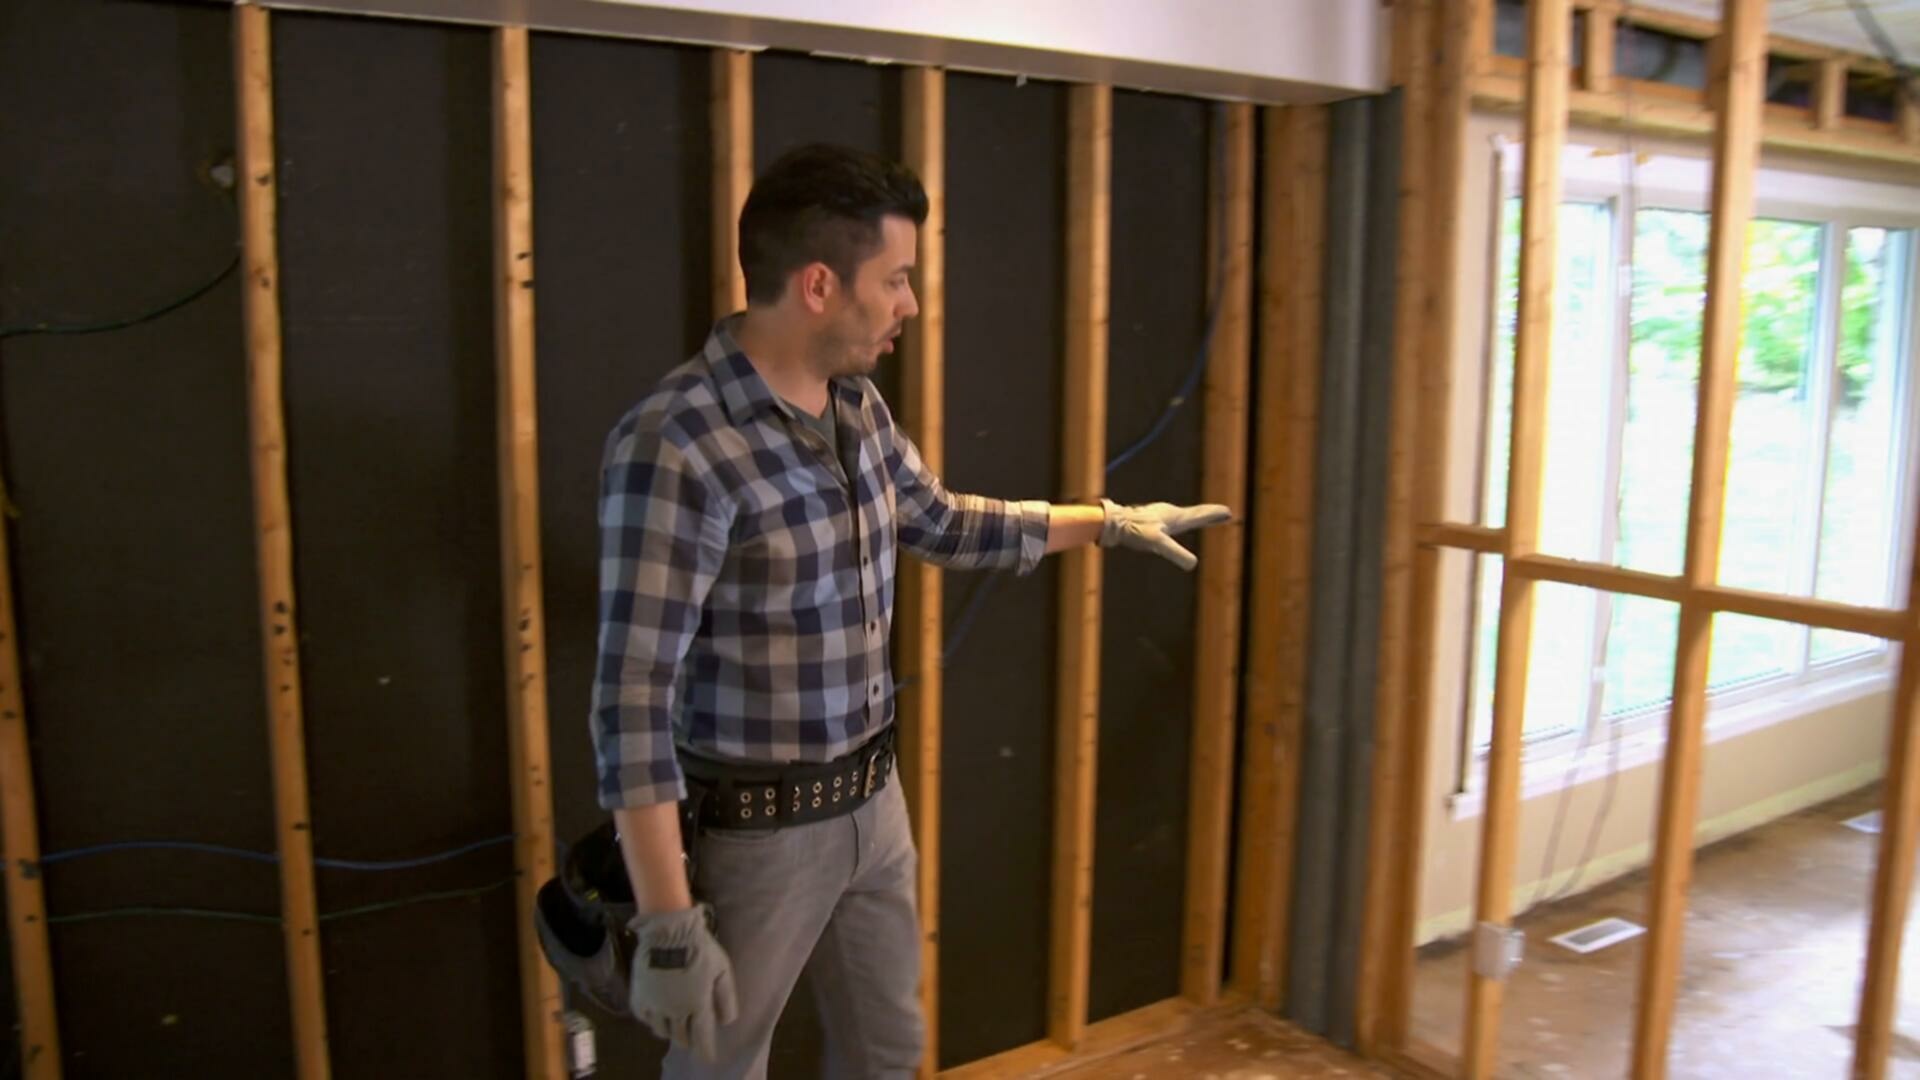 Property Brothers S11E05 Miles Apart George and Jenn 1080p MAX WEB DL DDP2 0 H 264 NTb TGx